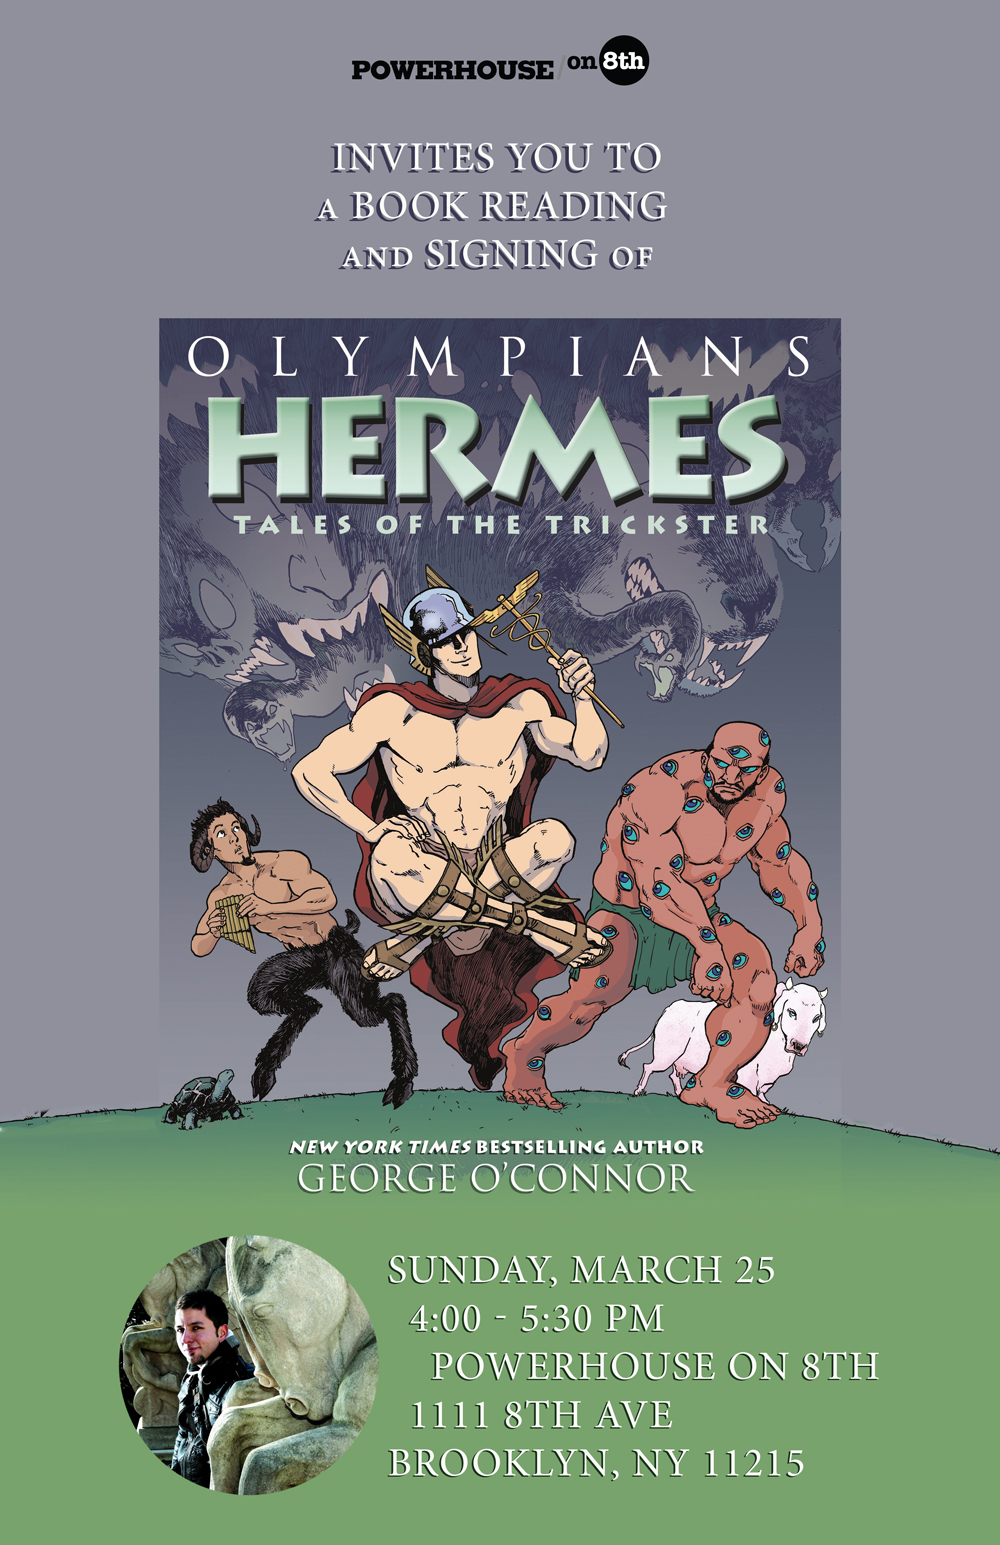 Book Reading & Signing: The Olympians: HERMES by George O'Connor